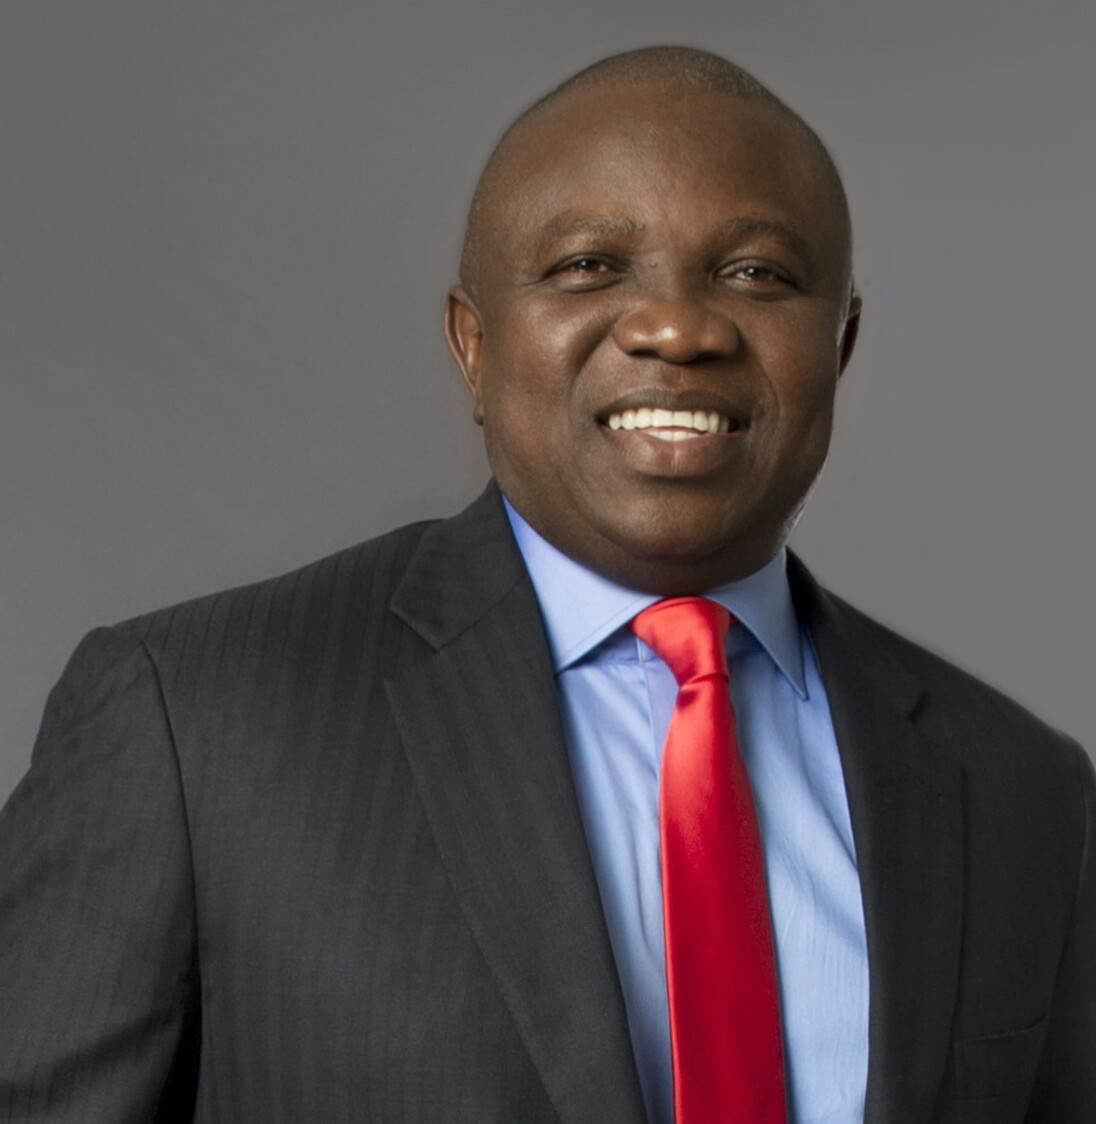 Lagos Offers Free Health Screening To Surulere